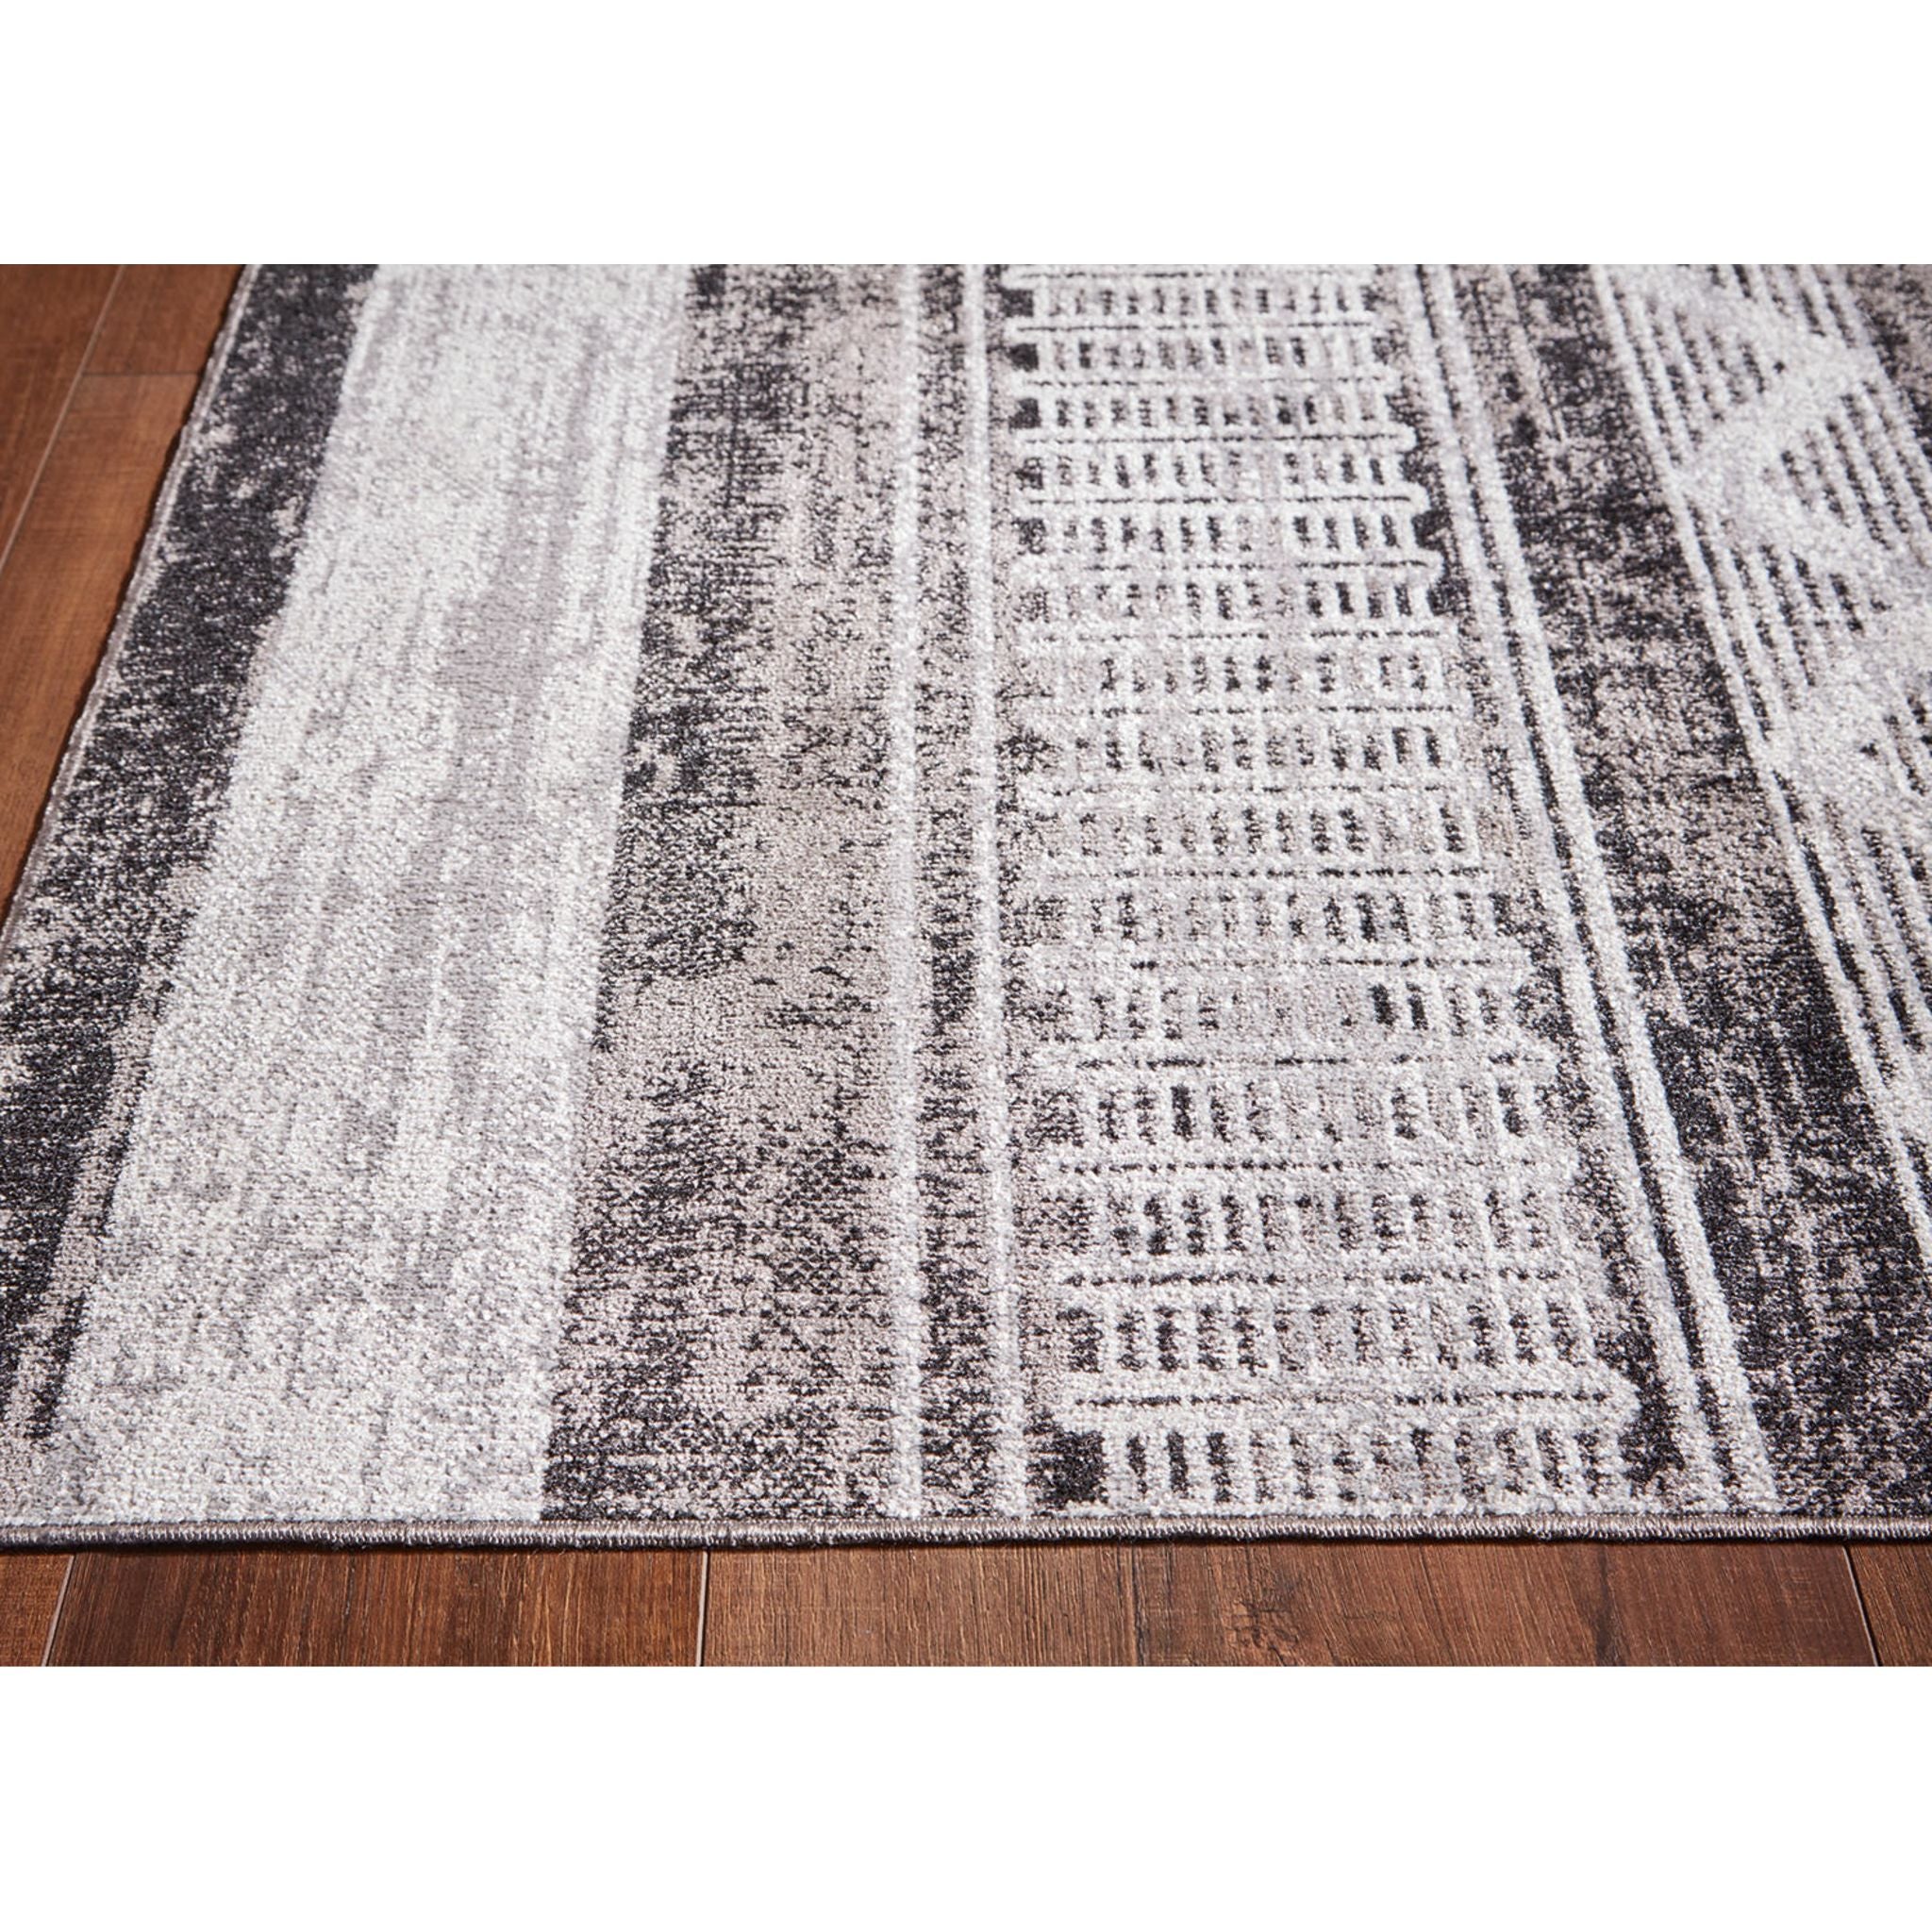 Henchester Area Rug - 8'x10'